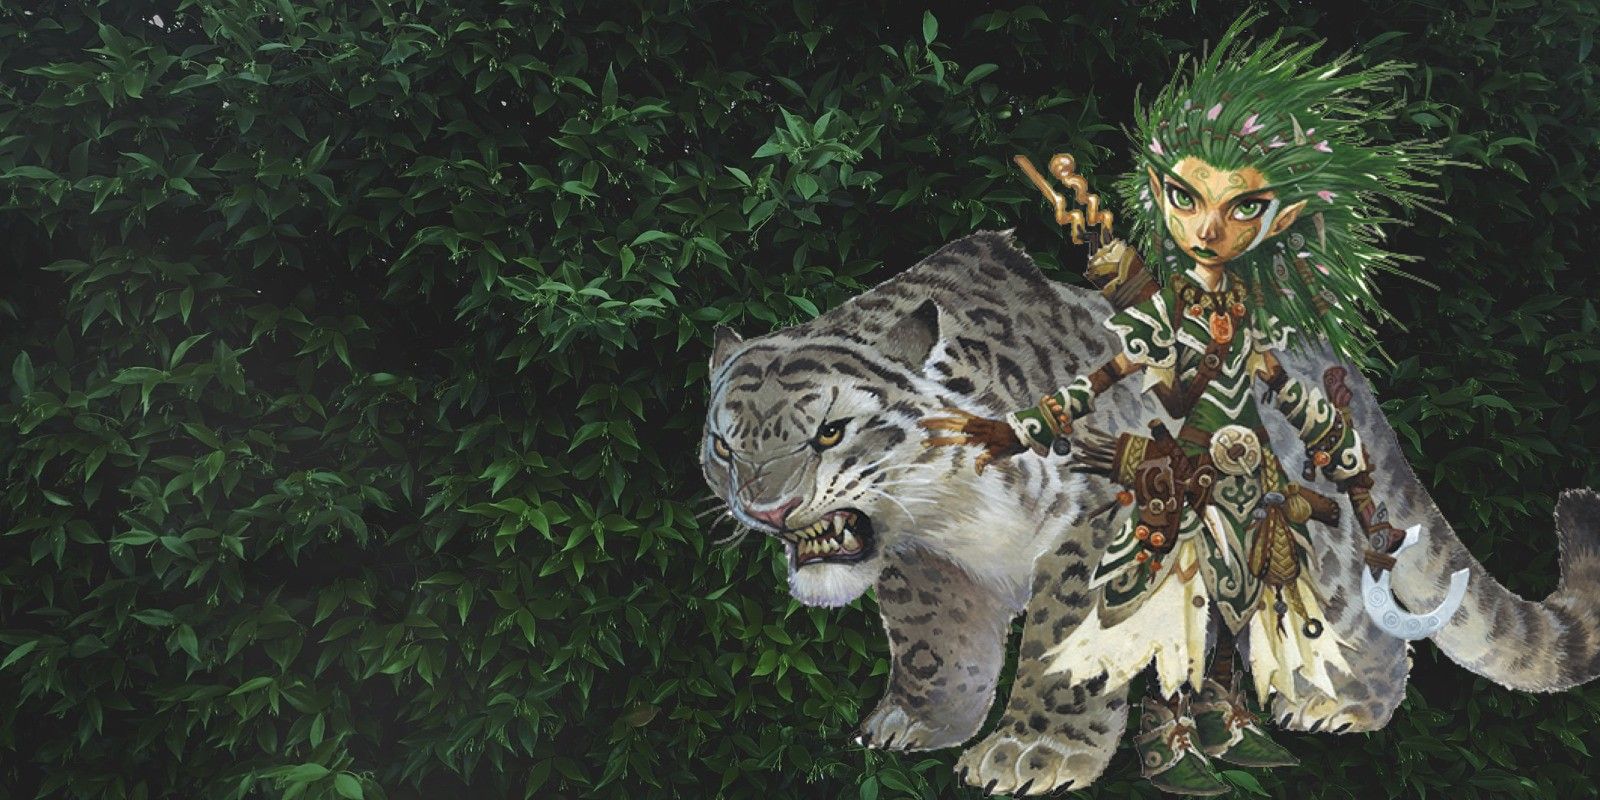 The Druid standing next to their Snow Leopard